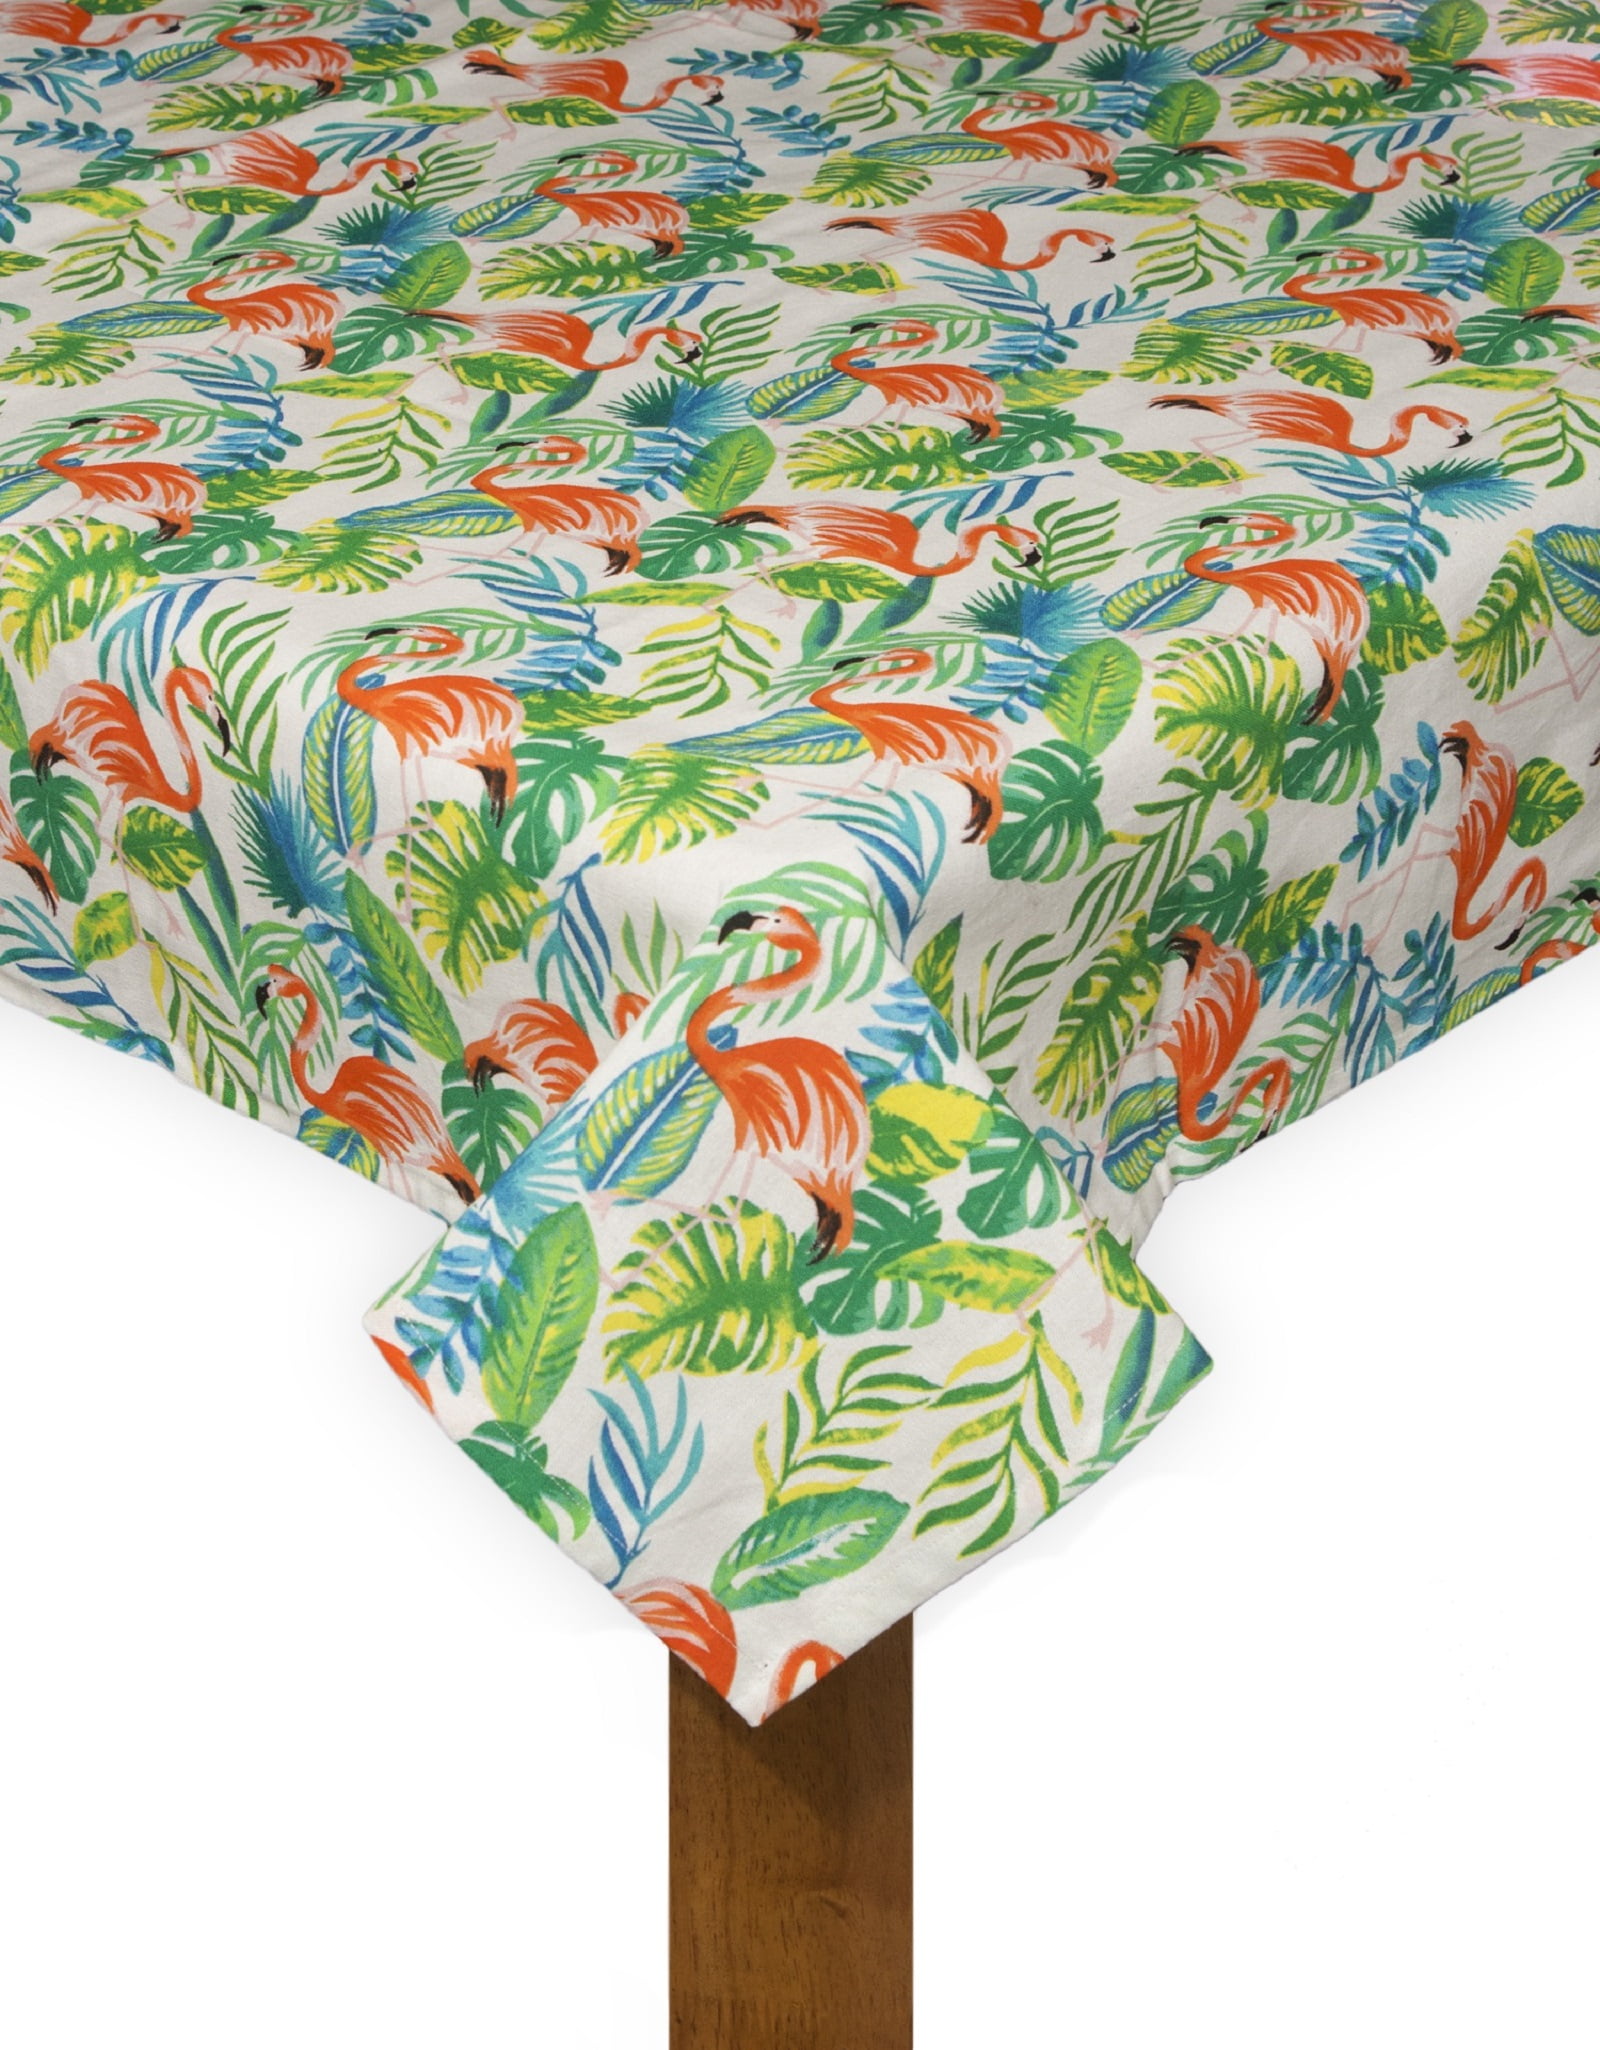 Tropical Palm Tree Leaves Exotic Greens Vinyl Flannel Tablecloth 52 x 70 Oblong 